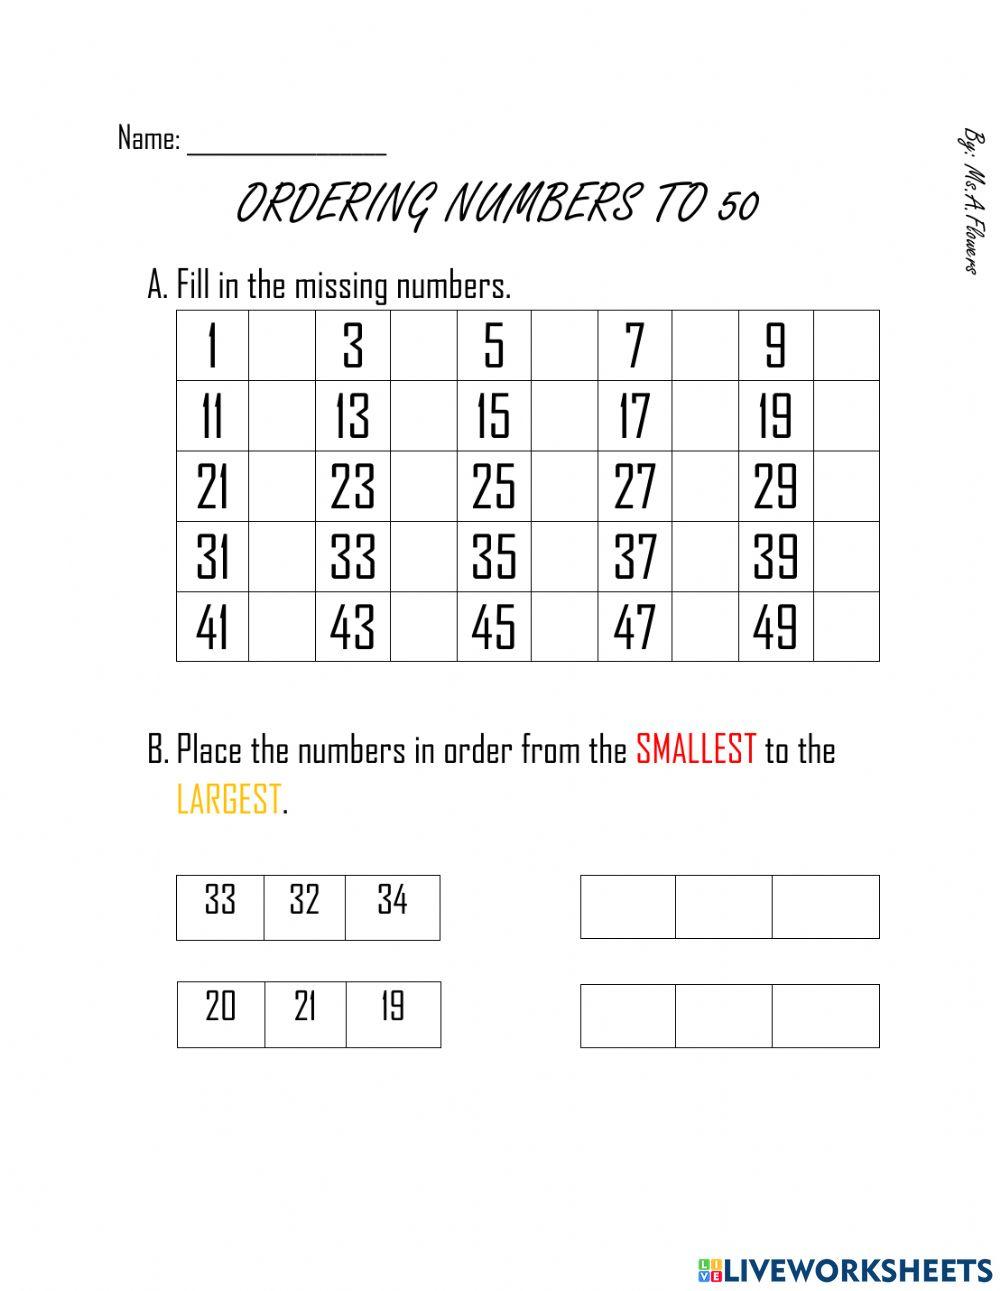 Ordering Numbers to 50